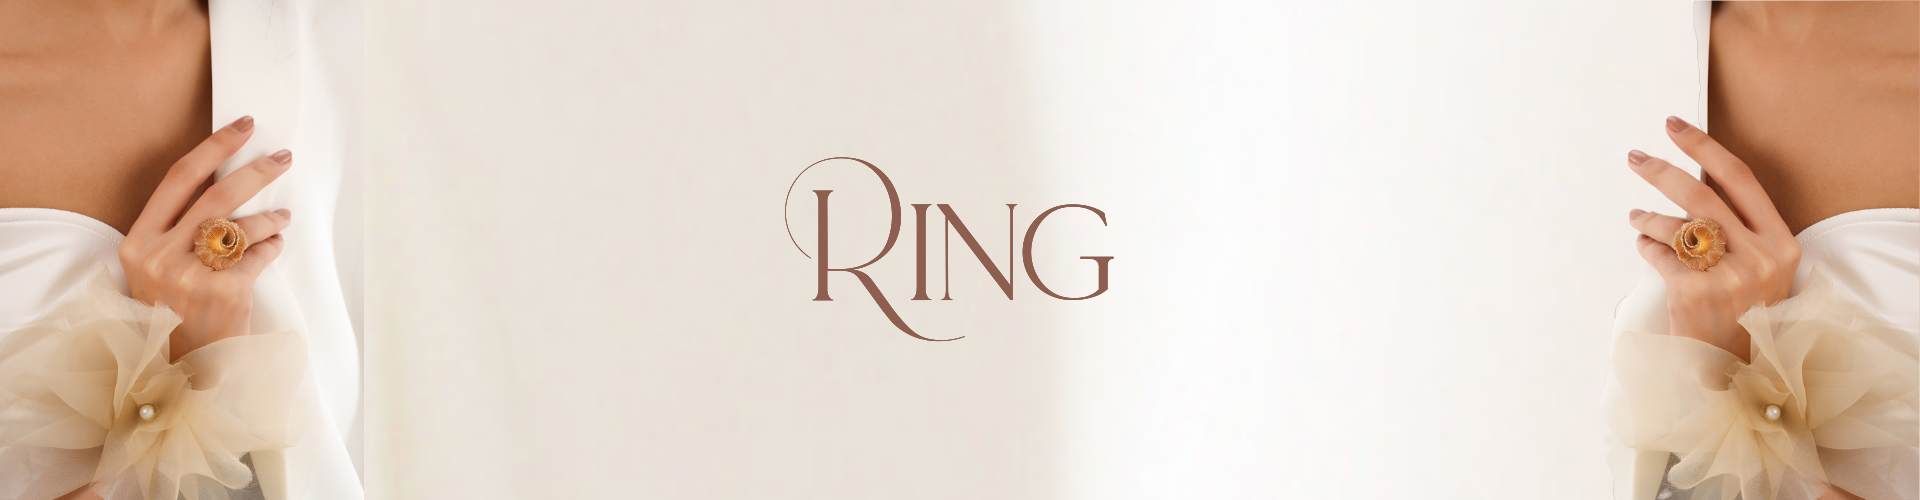 silver ring online